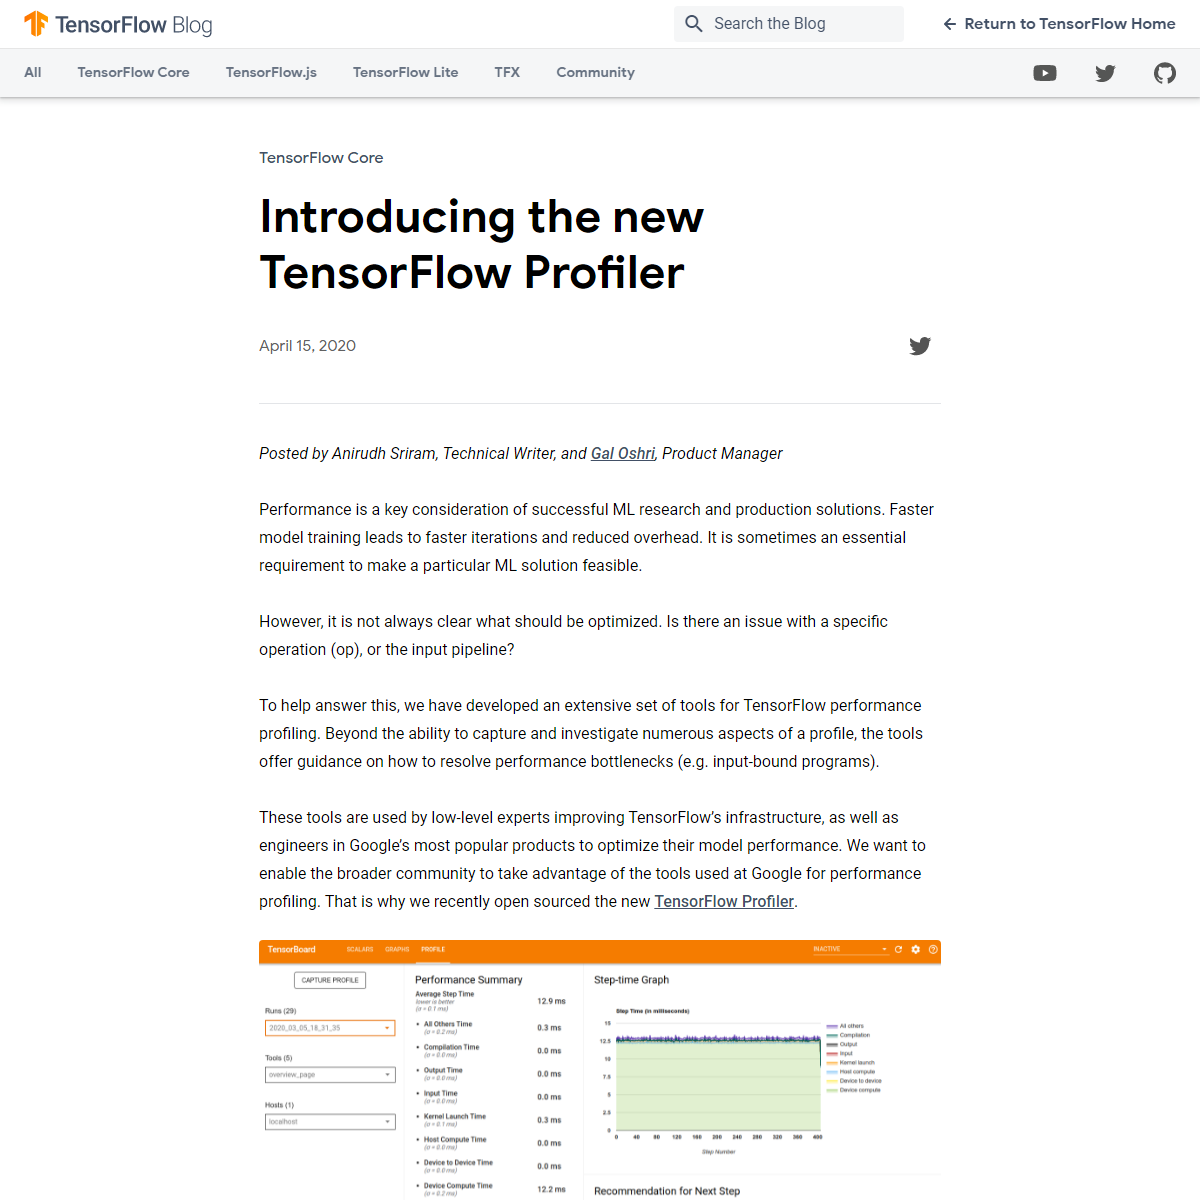 A complete backup of https://blog.tensorflow.org/2020/04/introducing-new-tensorflow-profiler.html